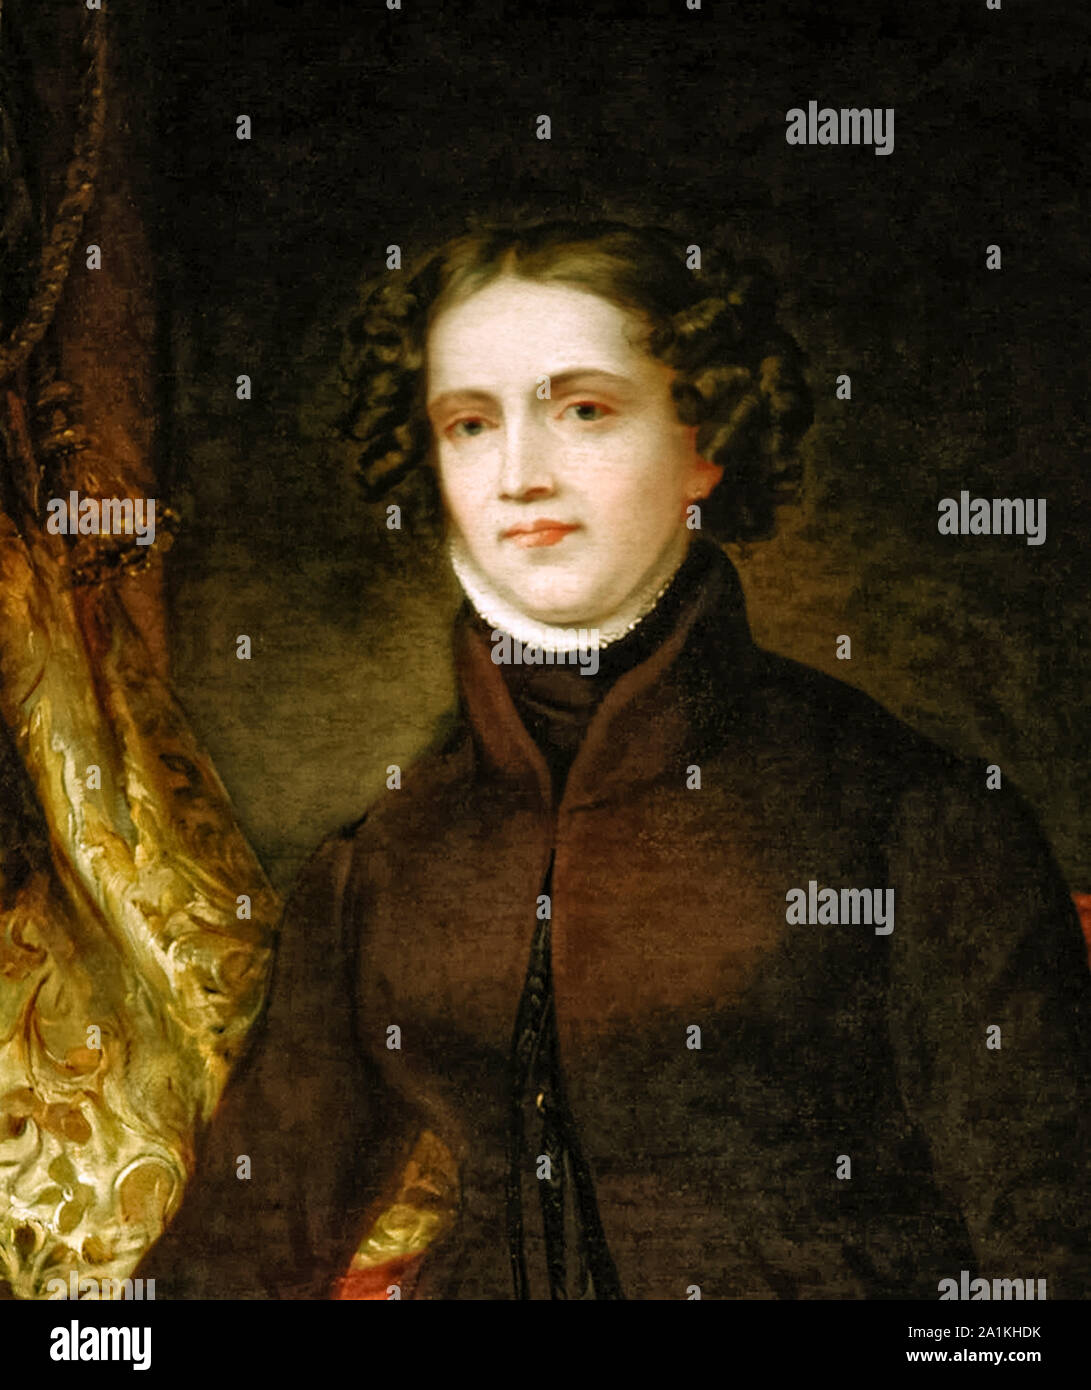 Anne Lister (1791-1840) English landowner from Halifax, West Yorkshire who kept extensive diaries chronicling her life.  Including her lesbian relationships which she wrote in code combining algebra and Ancient Greek and that were only cracked in the 1930s. Photograph of oil painting by Joshua Horner (1812-1881). Stock Photo